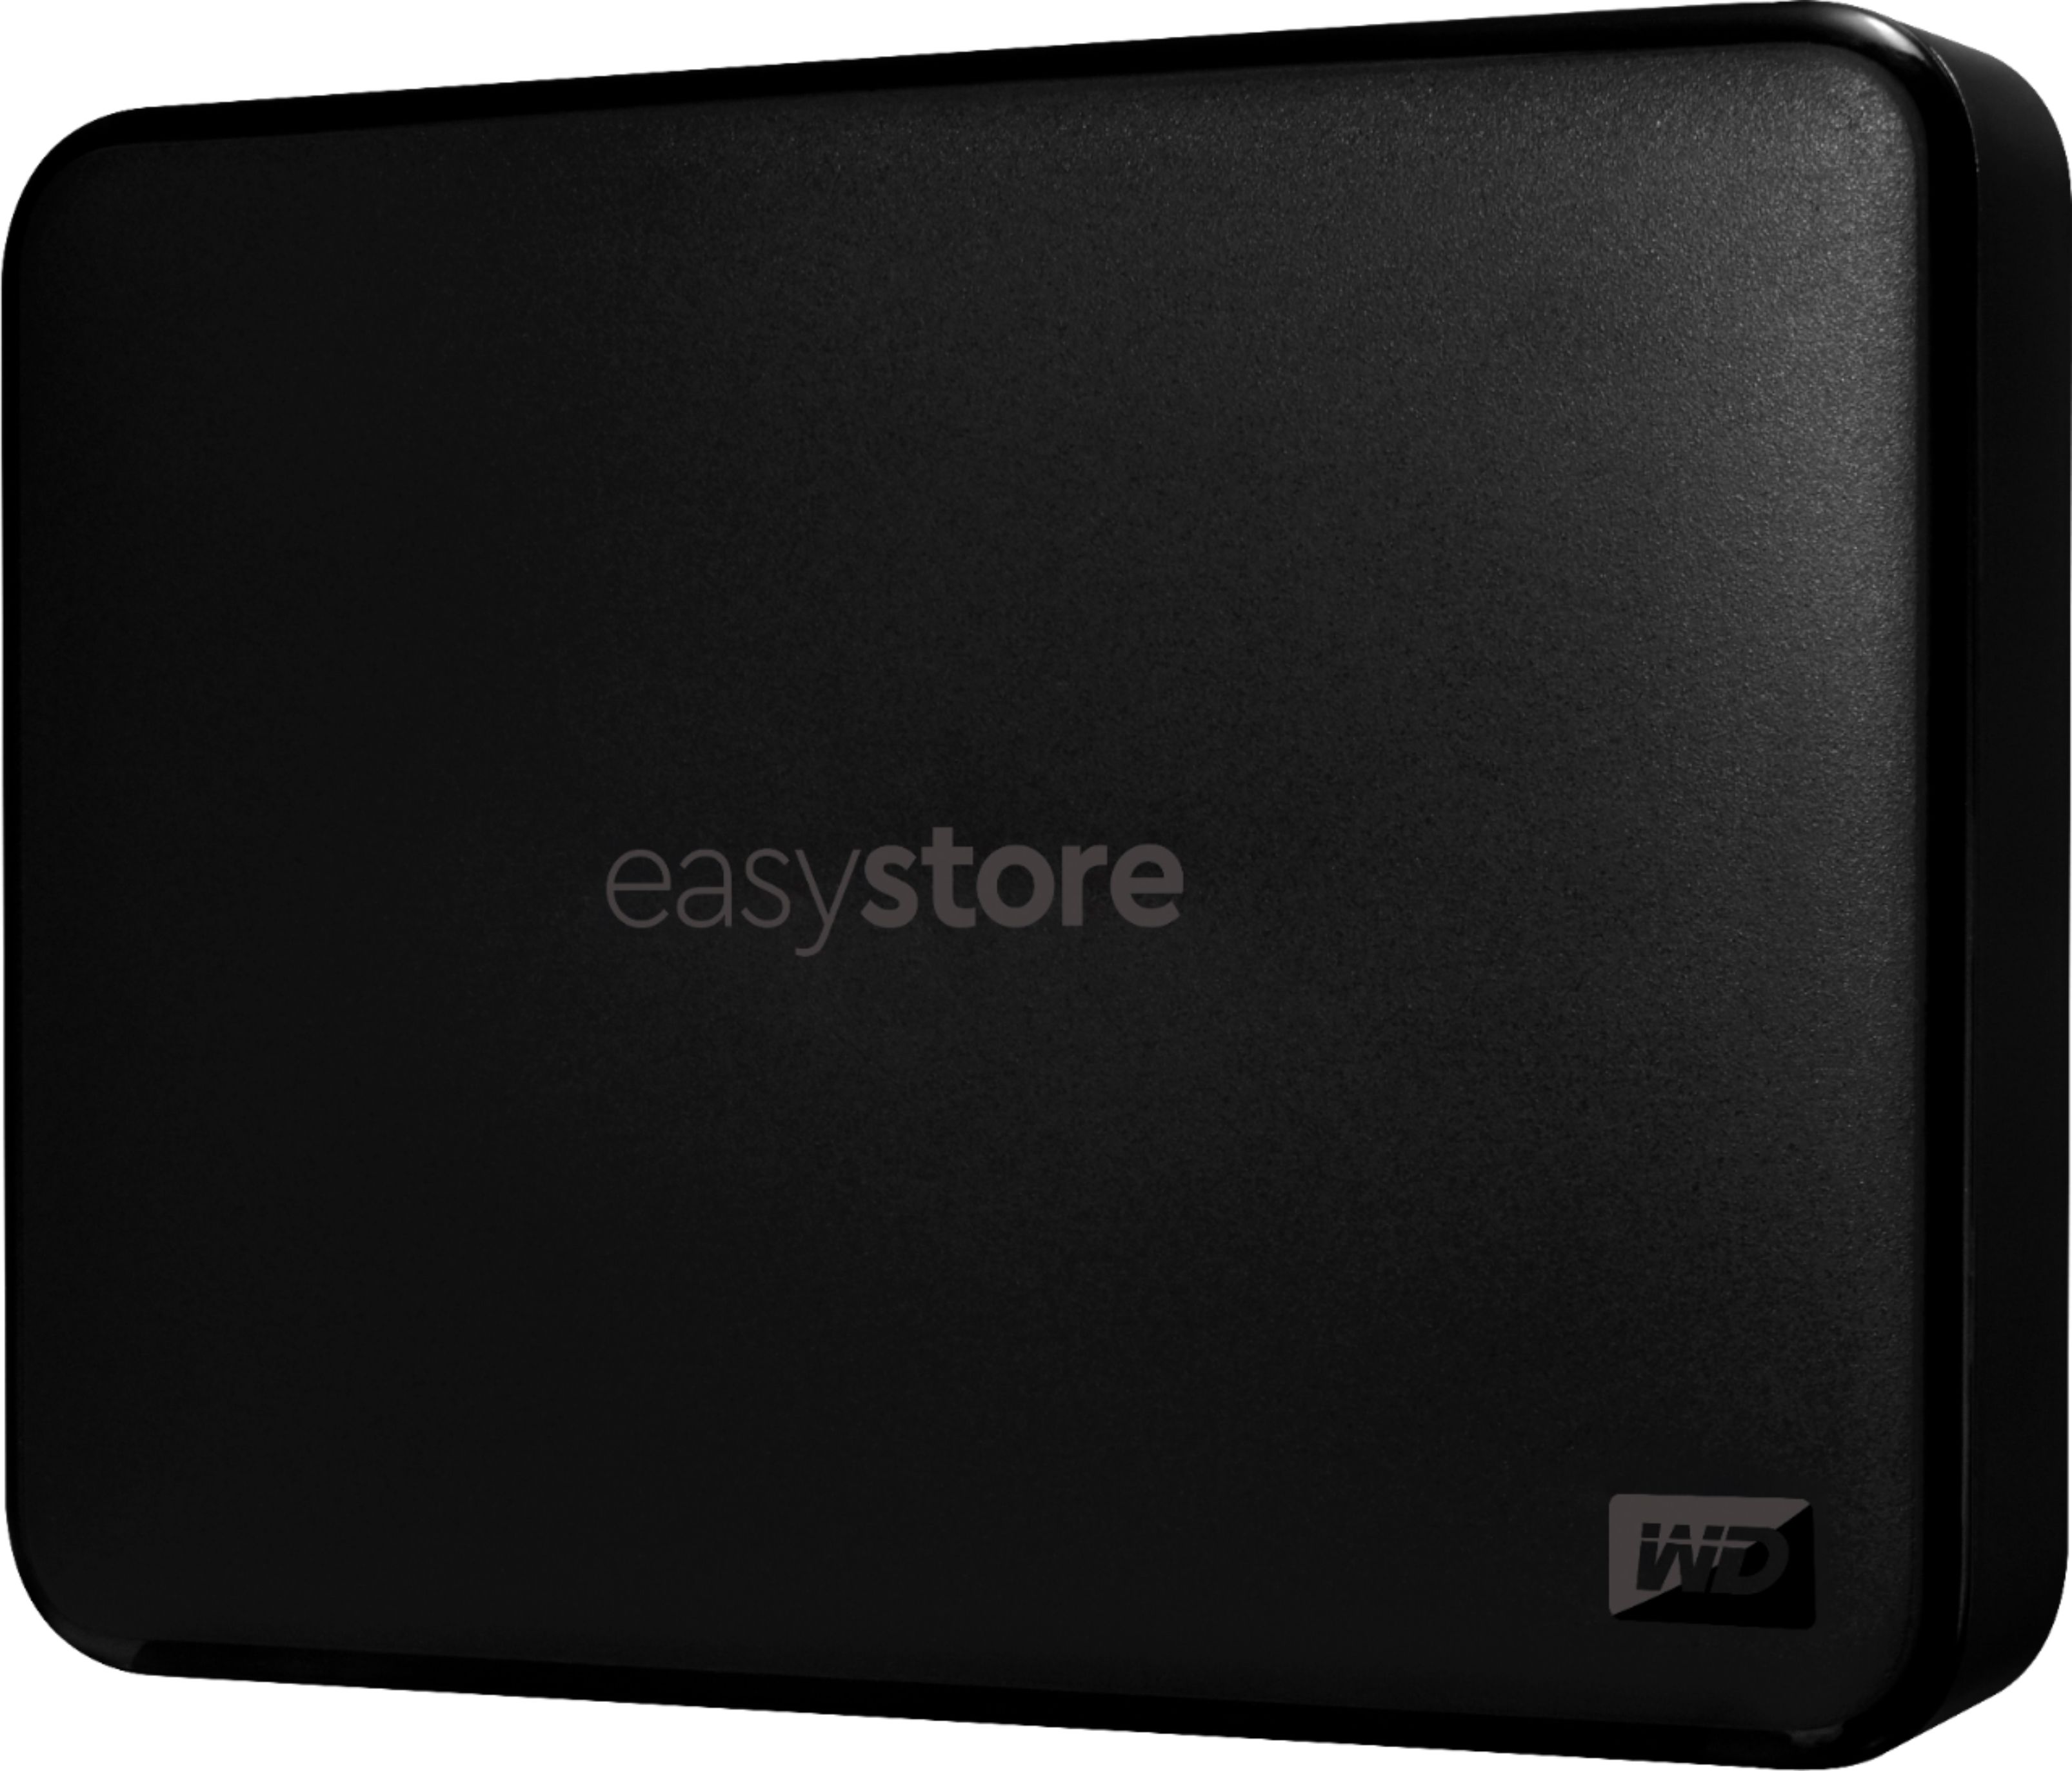 5TB WD Easystore External USB 3.0 Portable Hard Drive $95 at Bestbuy